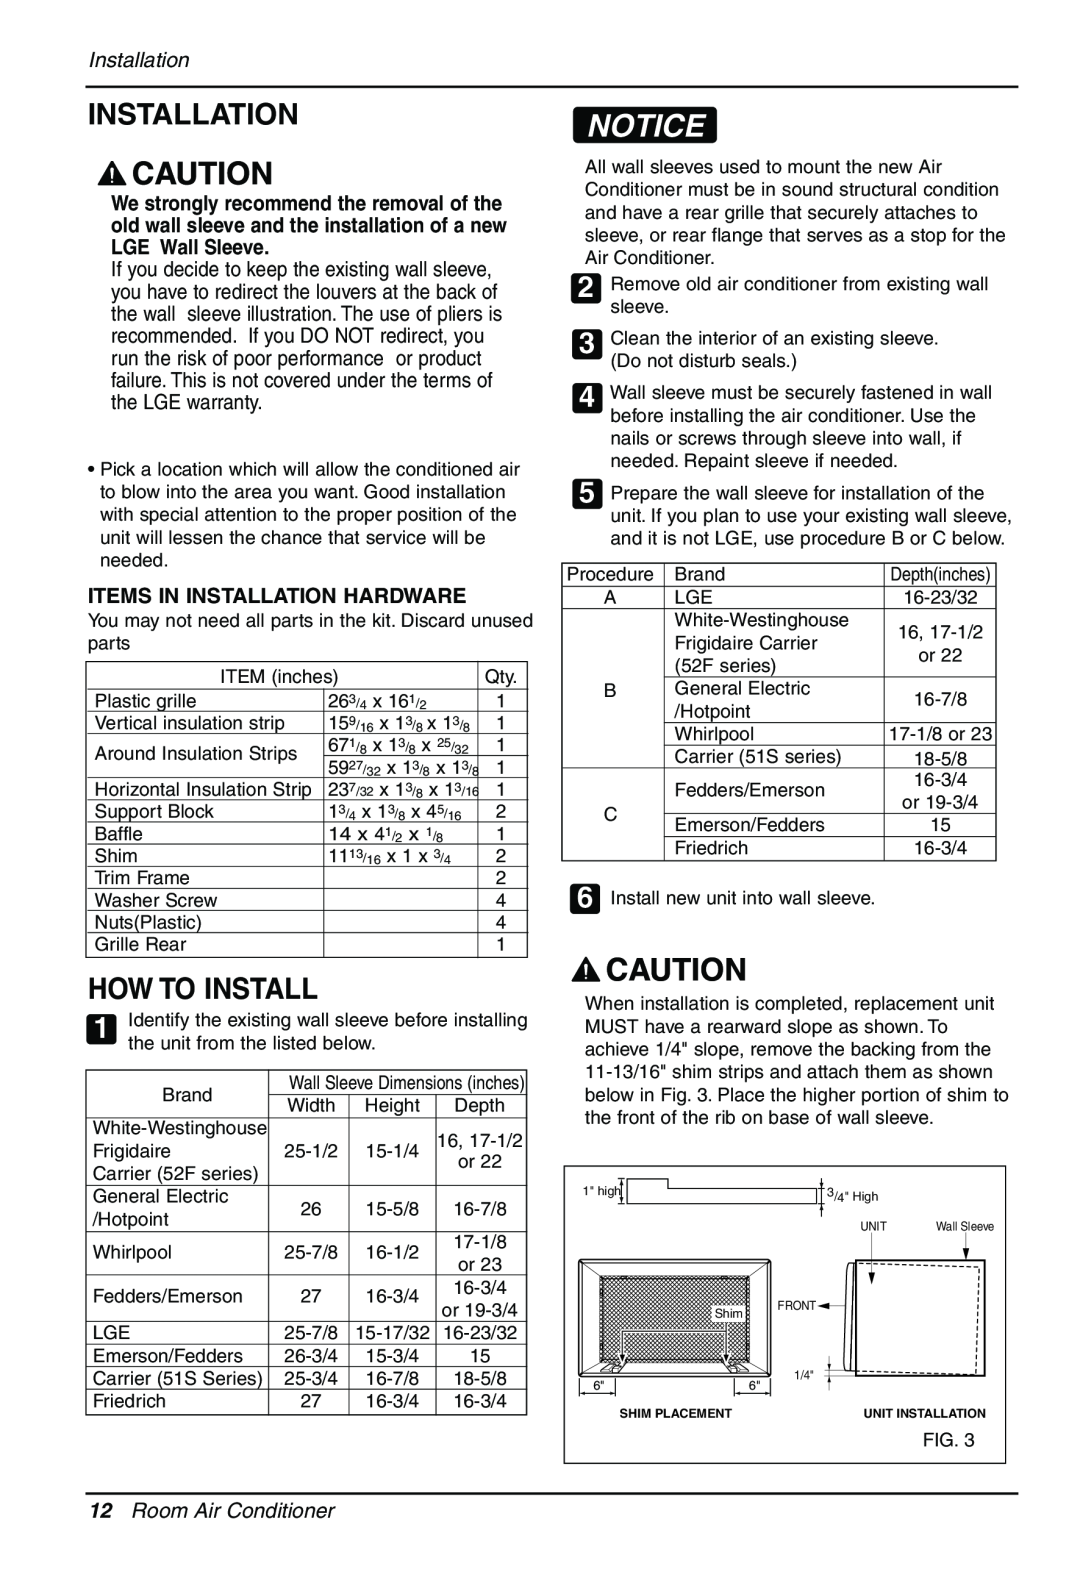 Sears LT123CNR, LT103CNR, LT143CNR manual How To Install, Items In Installation Hardware, Room Air Conditioner 